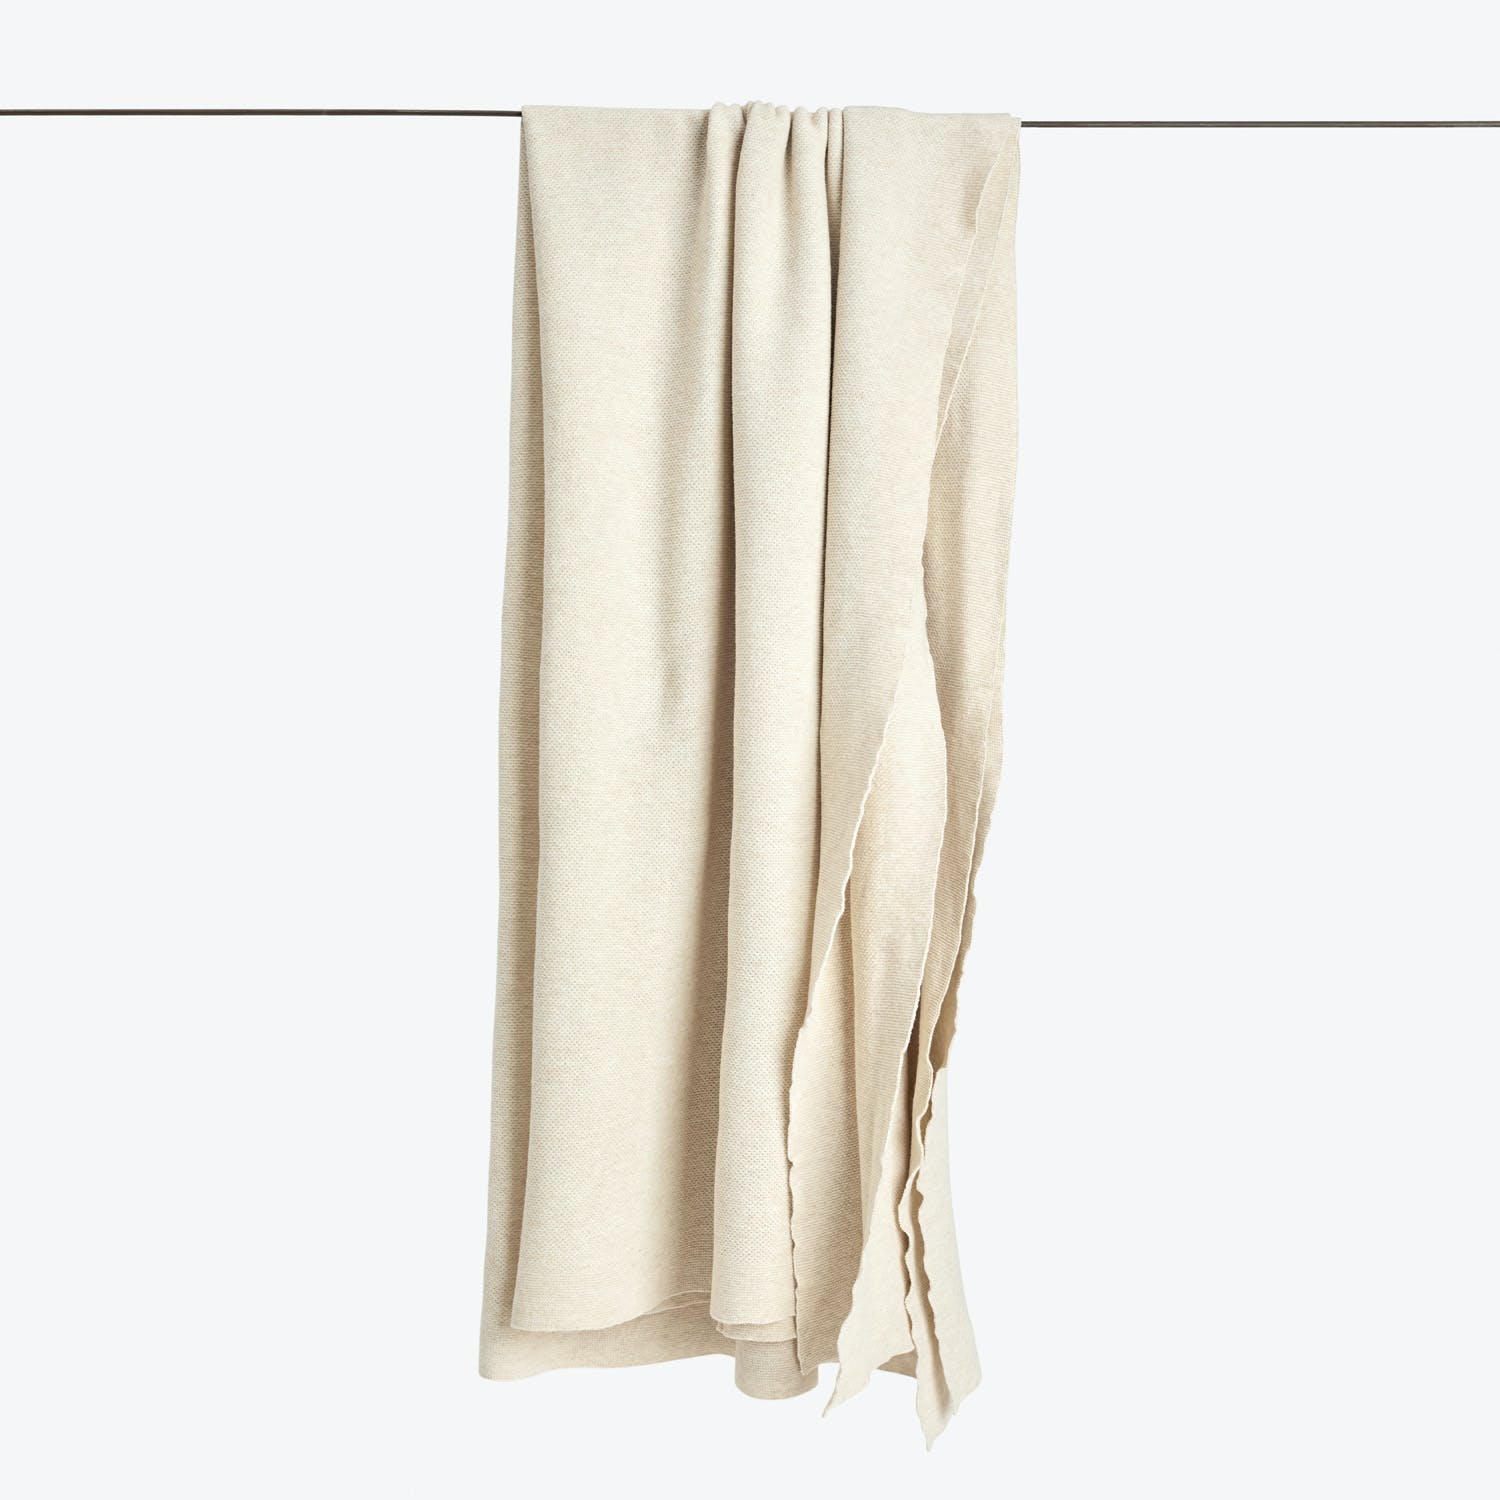 Beige fabric curtain folded on a rod against white background.